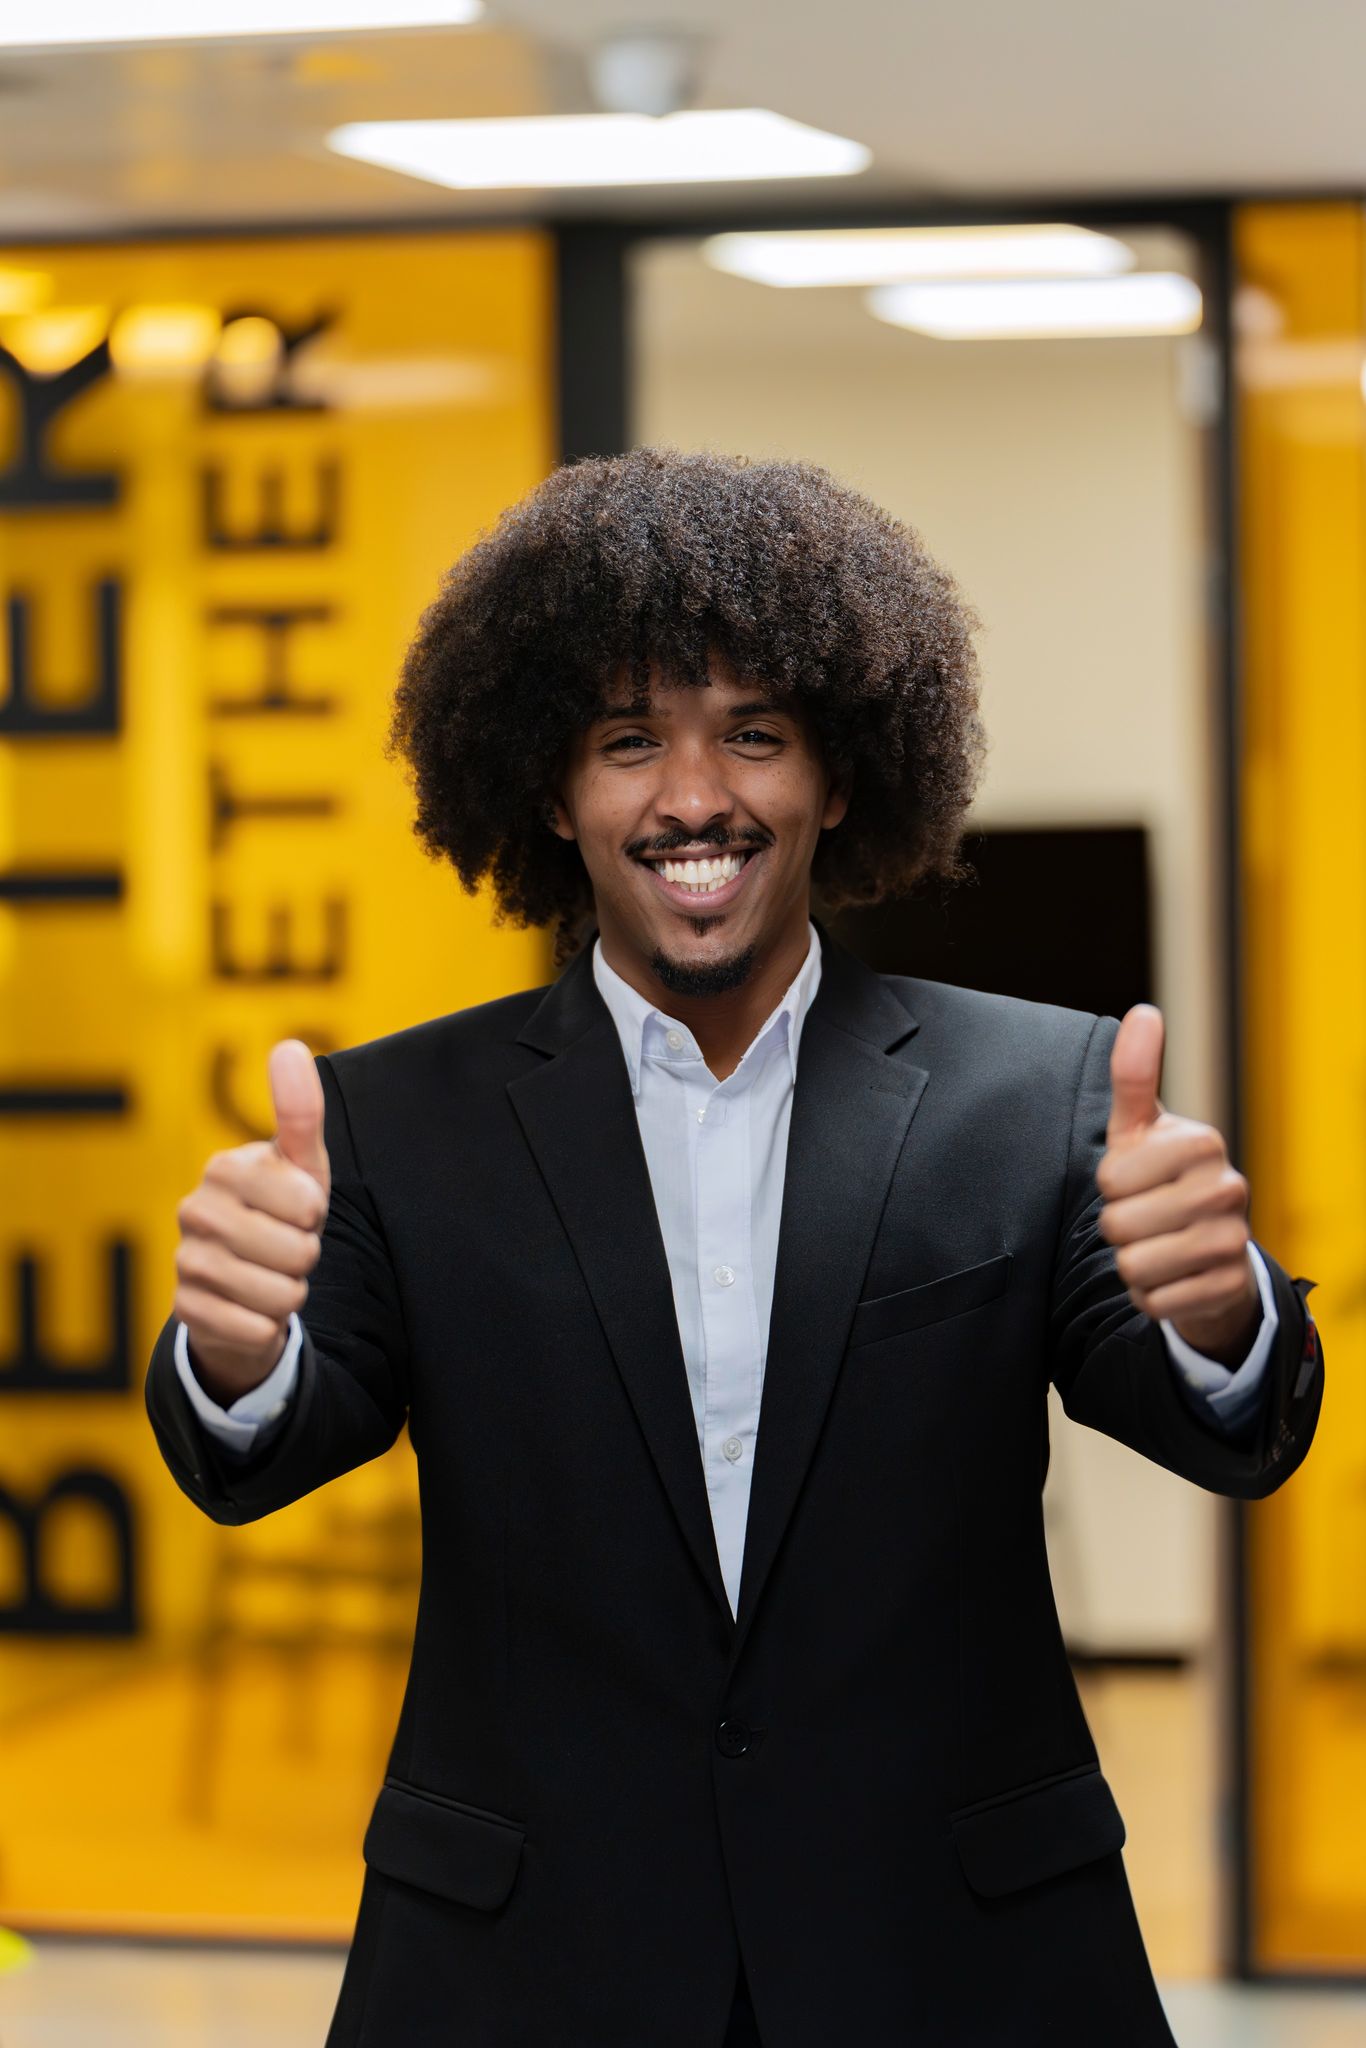 Enthusiastic businessman with afro hairstyle gives a double thumbs up in a vibrant office space.